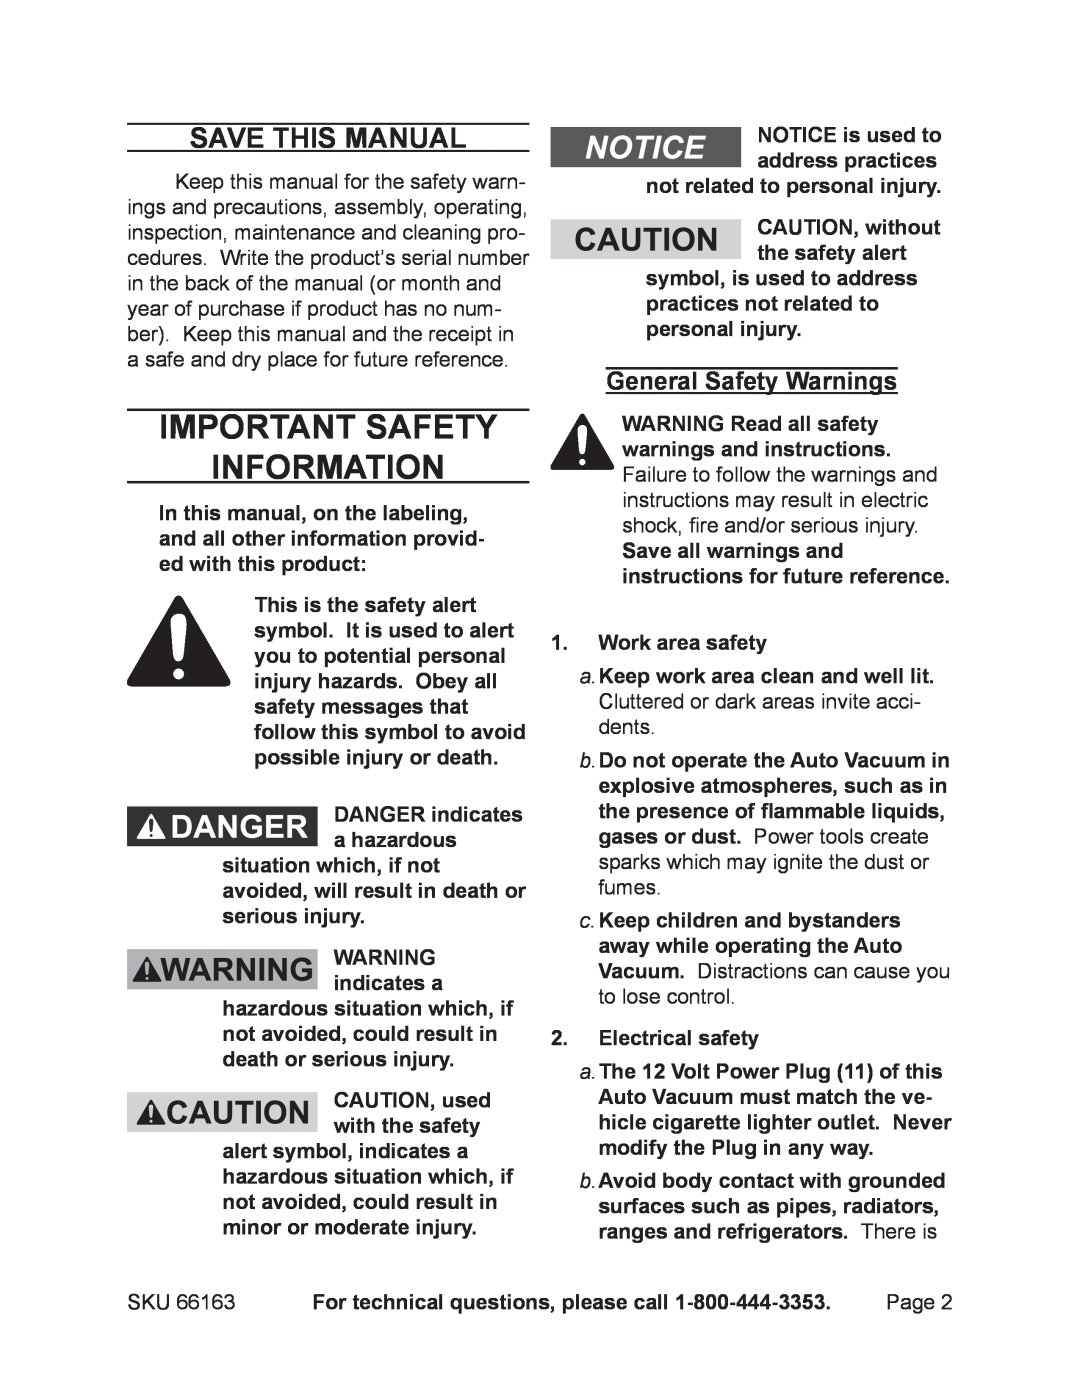 Harbor Freight Tools 66163 operating instructions Important SAFETY Information, Save This Manual, General Safety Warnings 